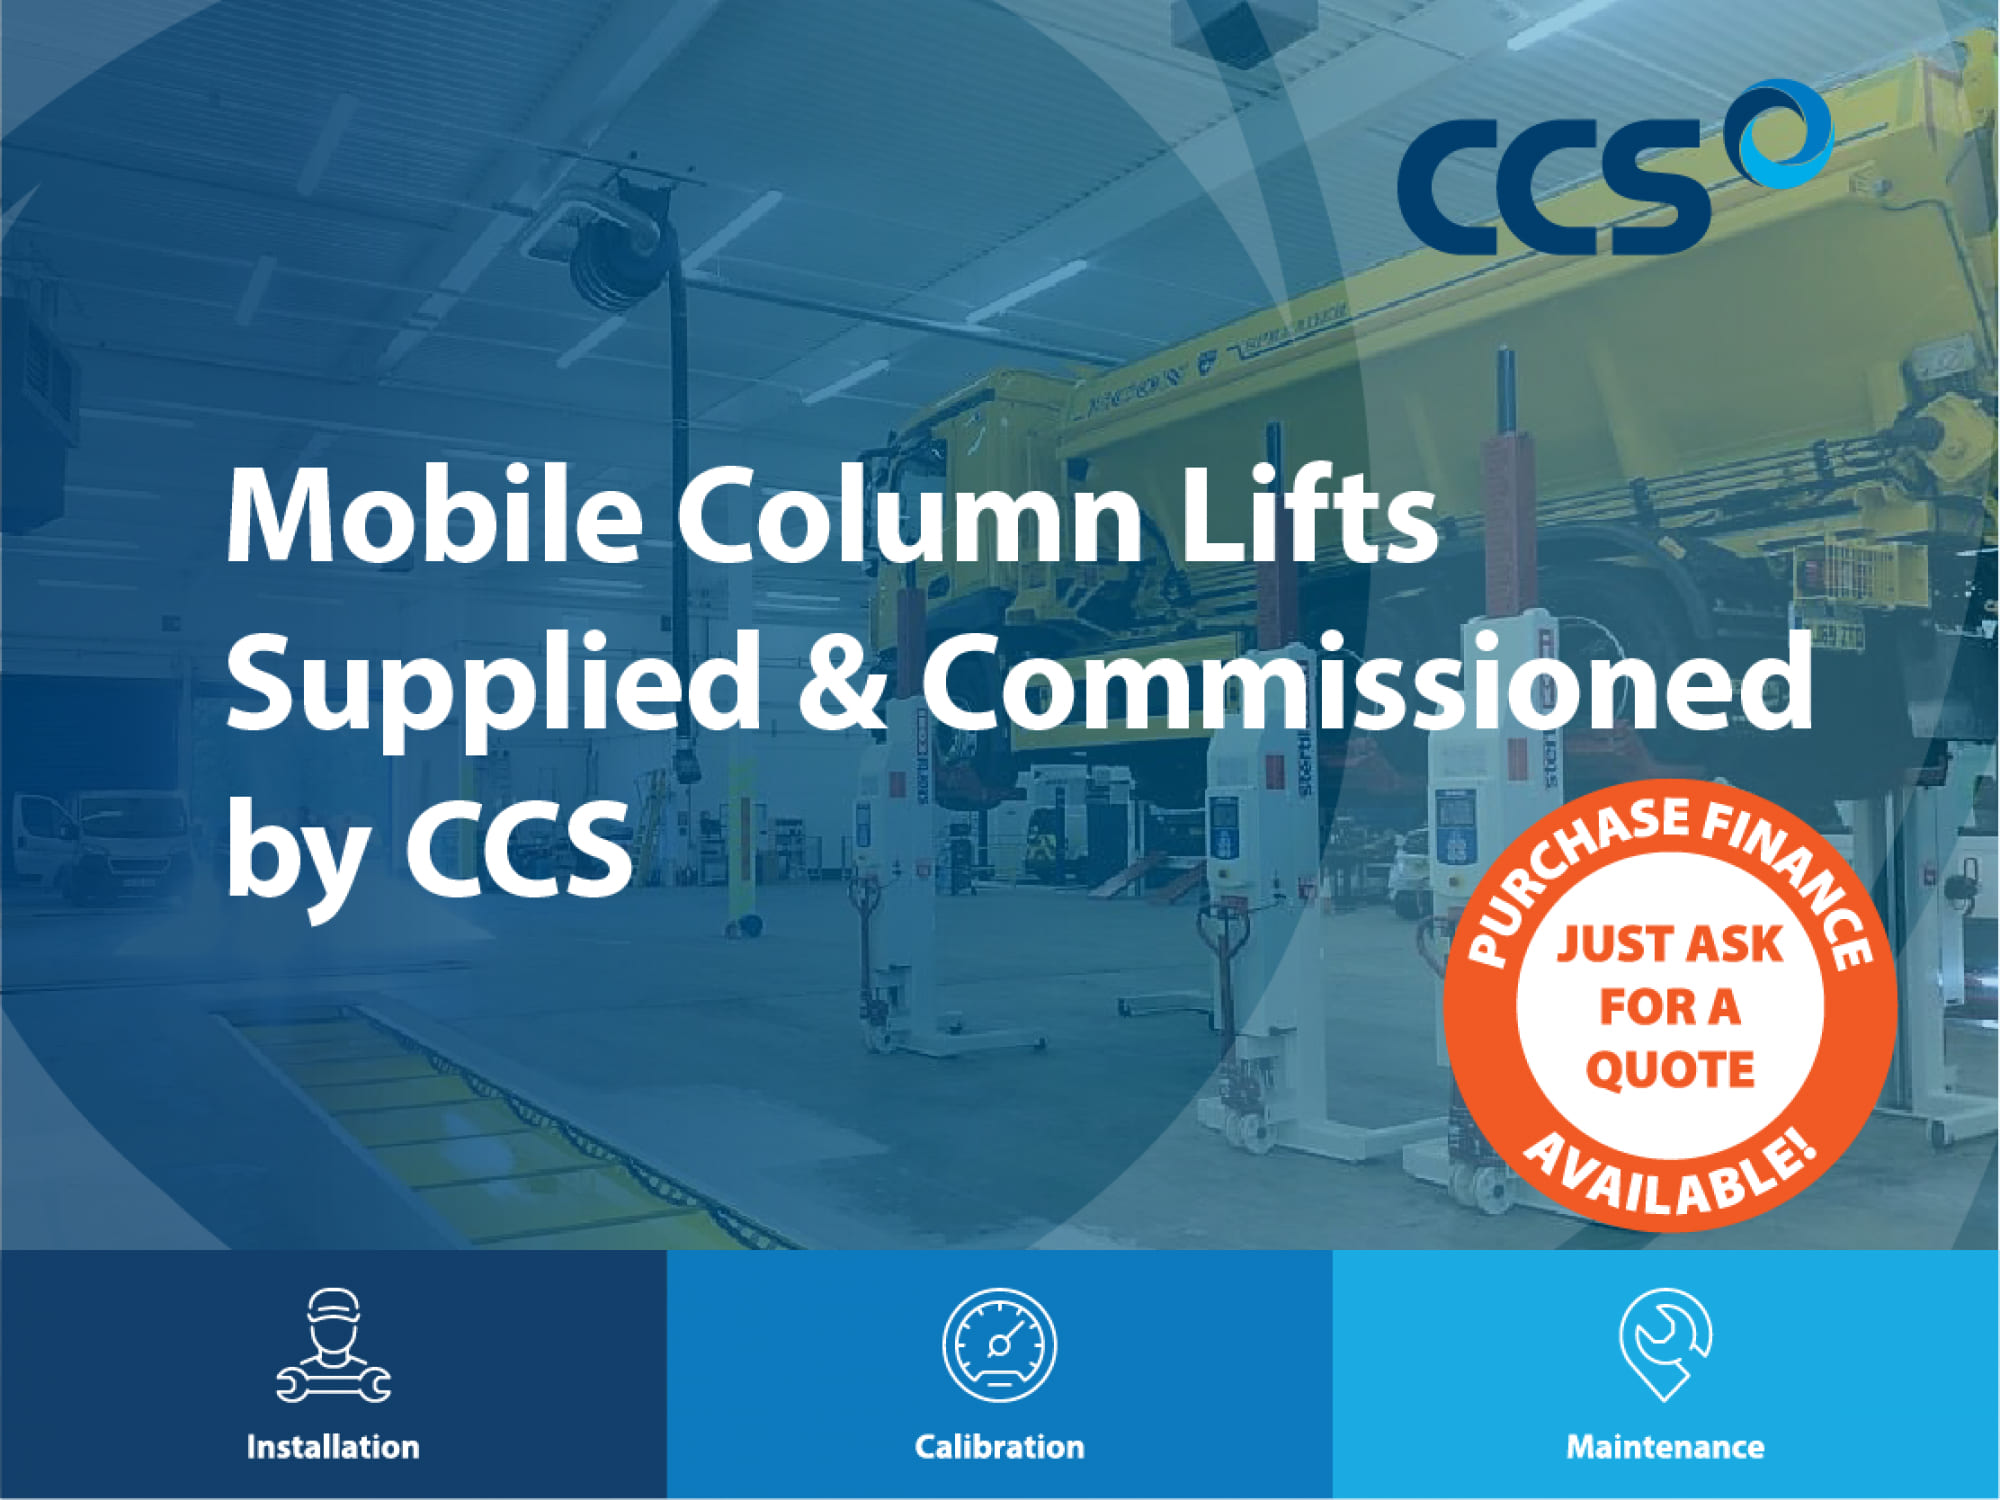 Mobile column lifts for commercial workshops supplied, commissioned & with full training from CCS